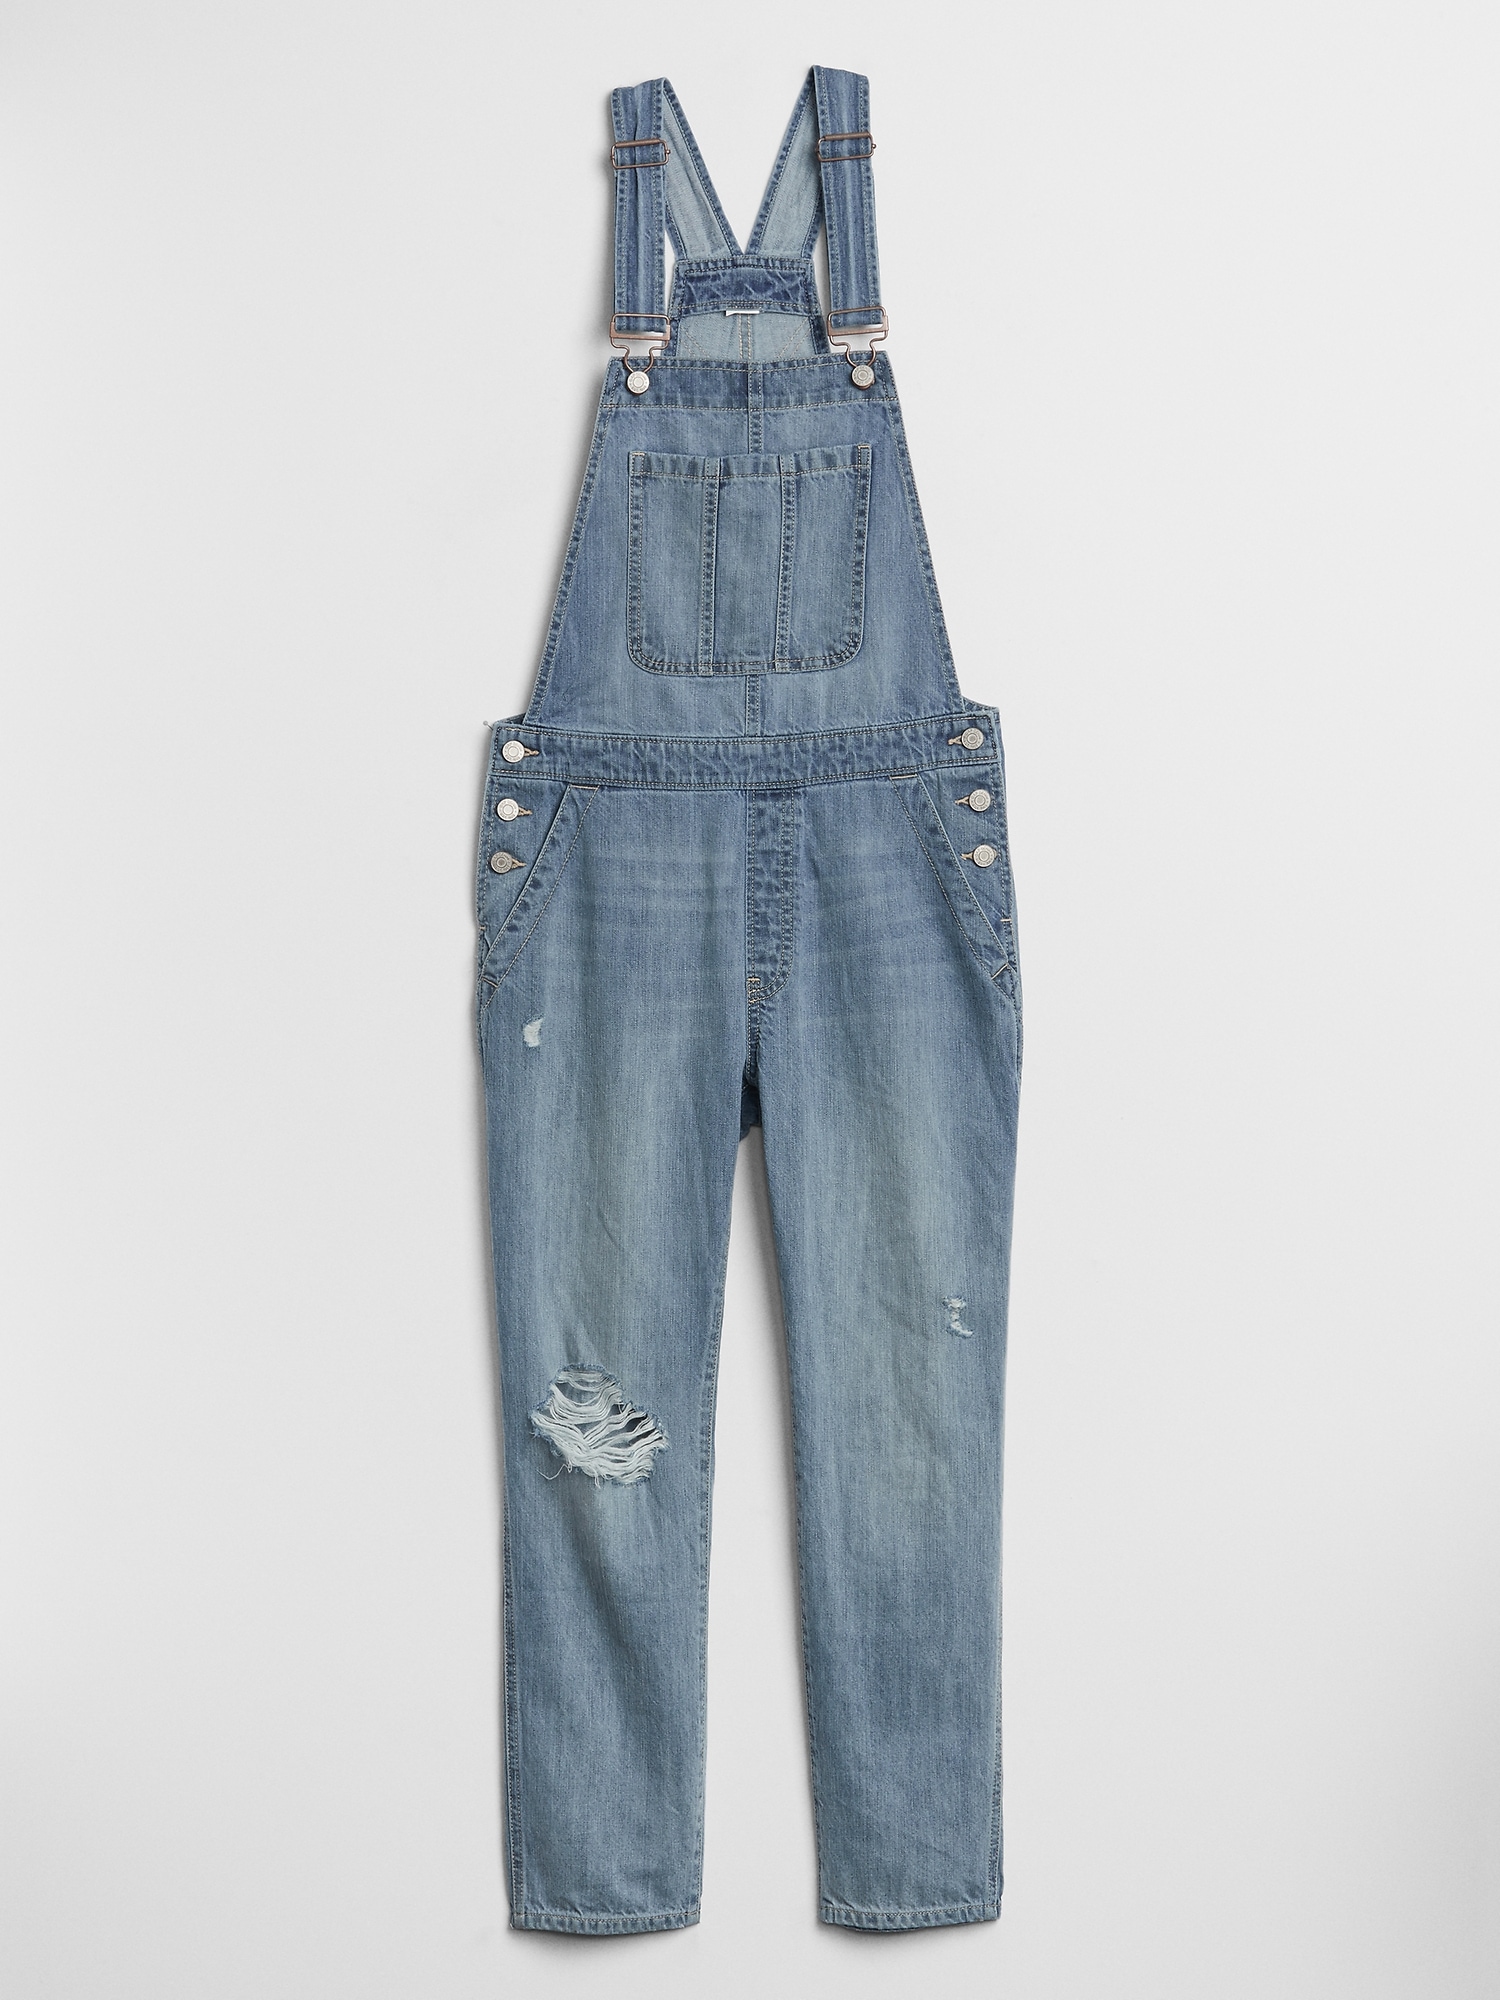 cute baggy overalls